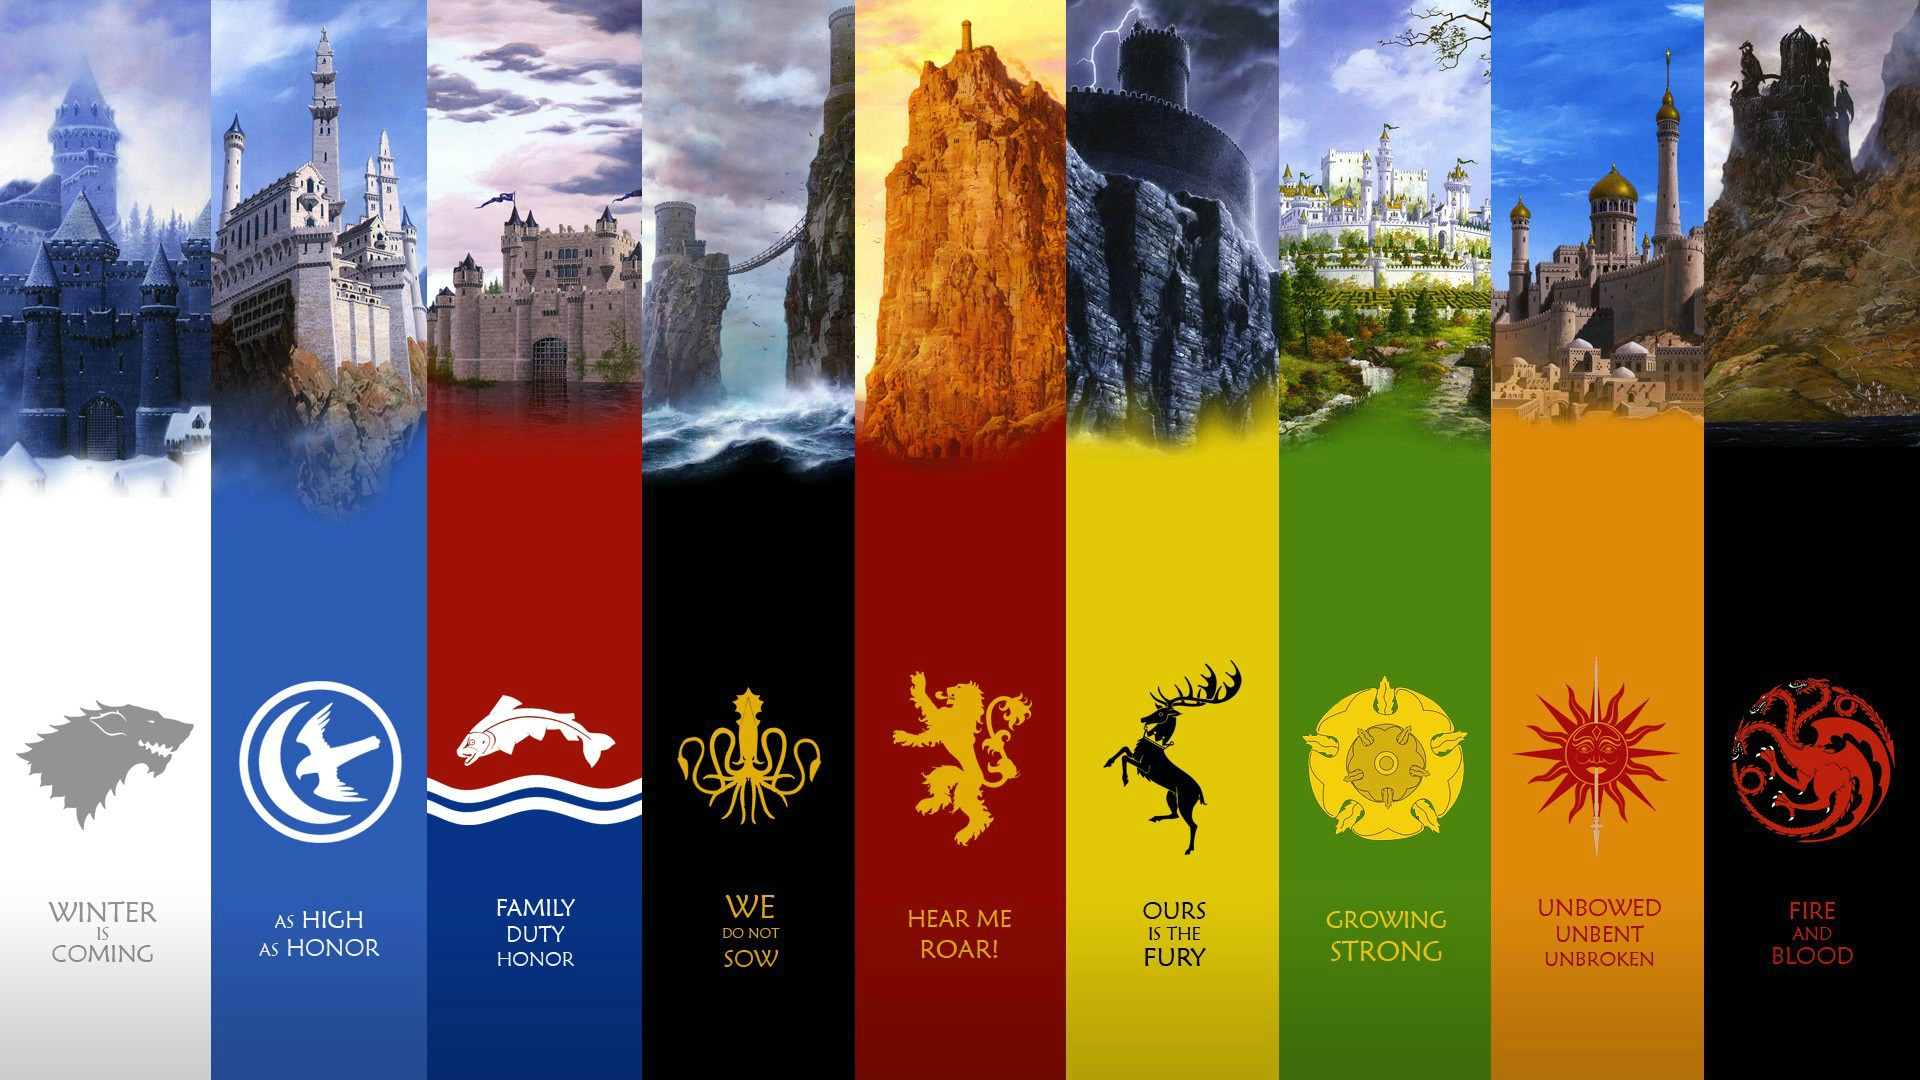 Song Of Ice And Fire Puter Wallpaper Desktop Background